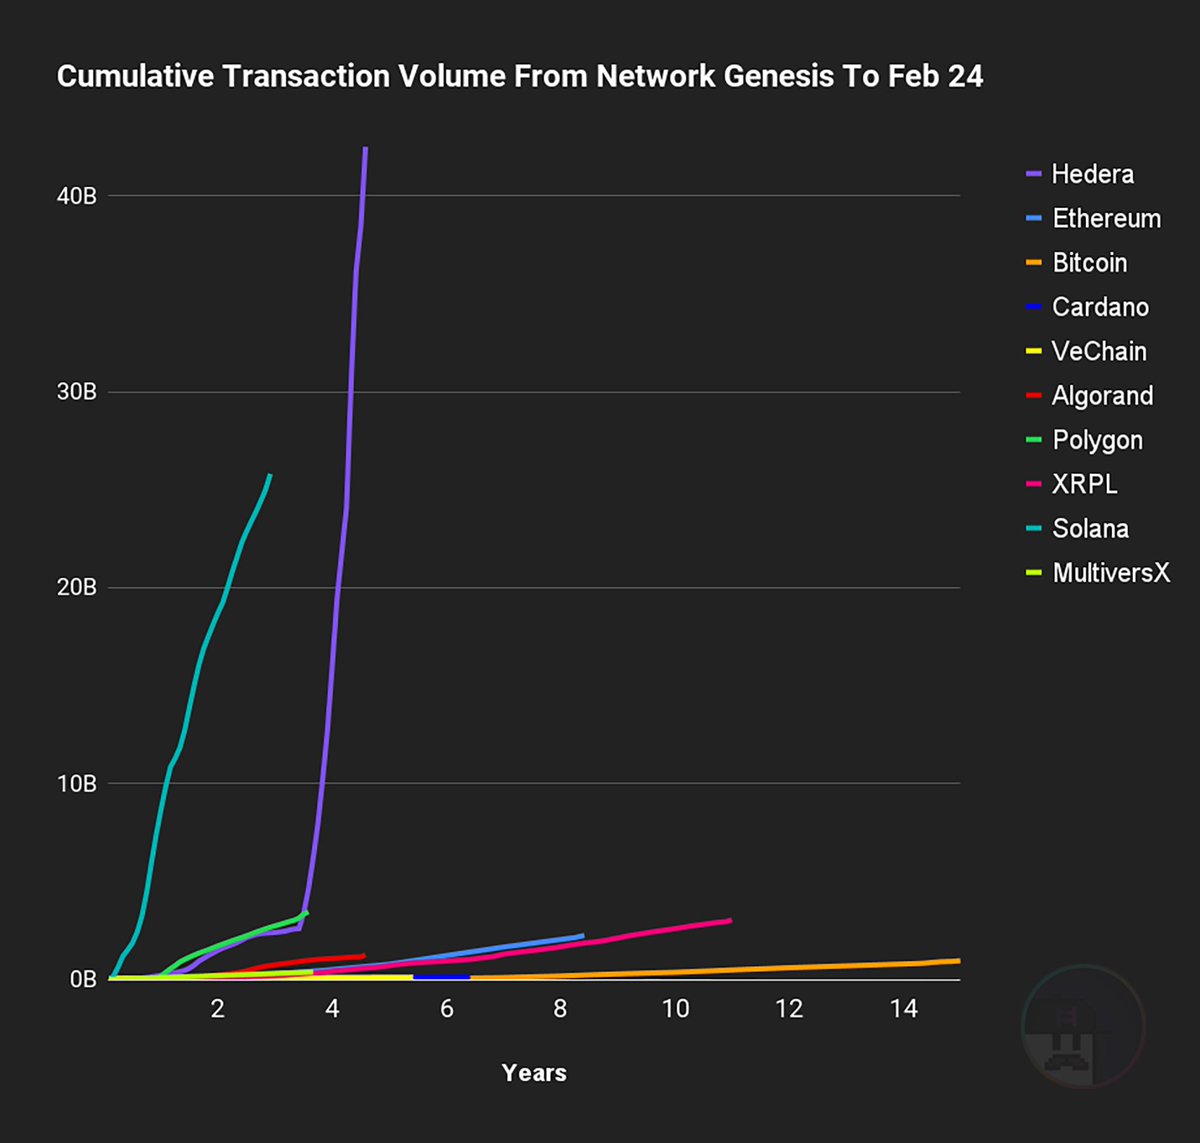 @3orovik Ħedera 102M transactions in the last 24 hours 3.5s to true finality $0.0001 average cost per transaction Leaderless with no MEV @HashPackApp @SaucerSwapLabs @SentX_io